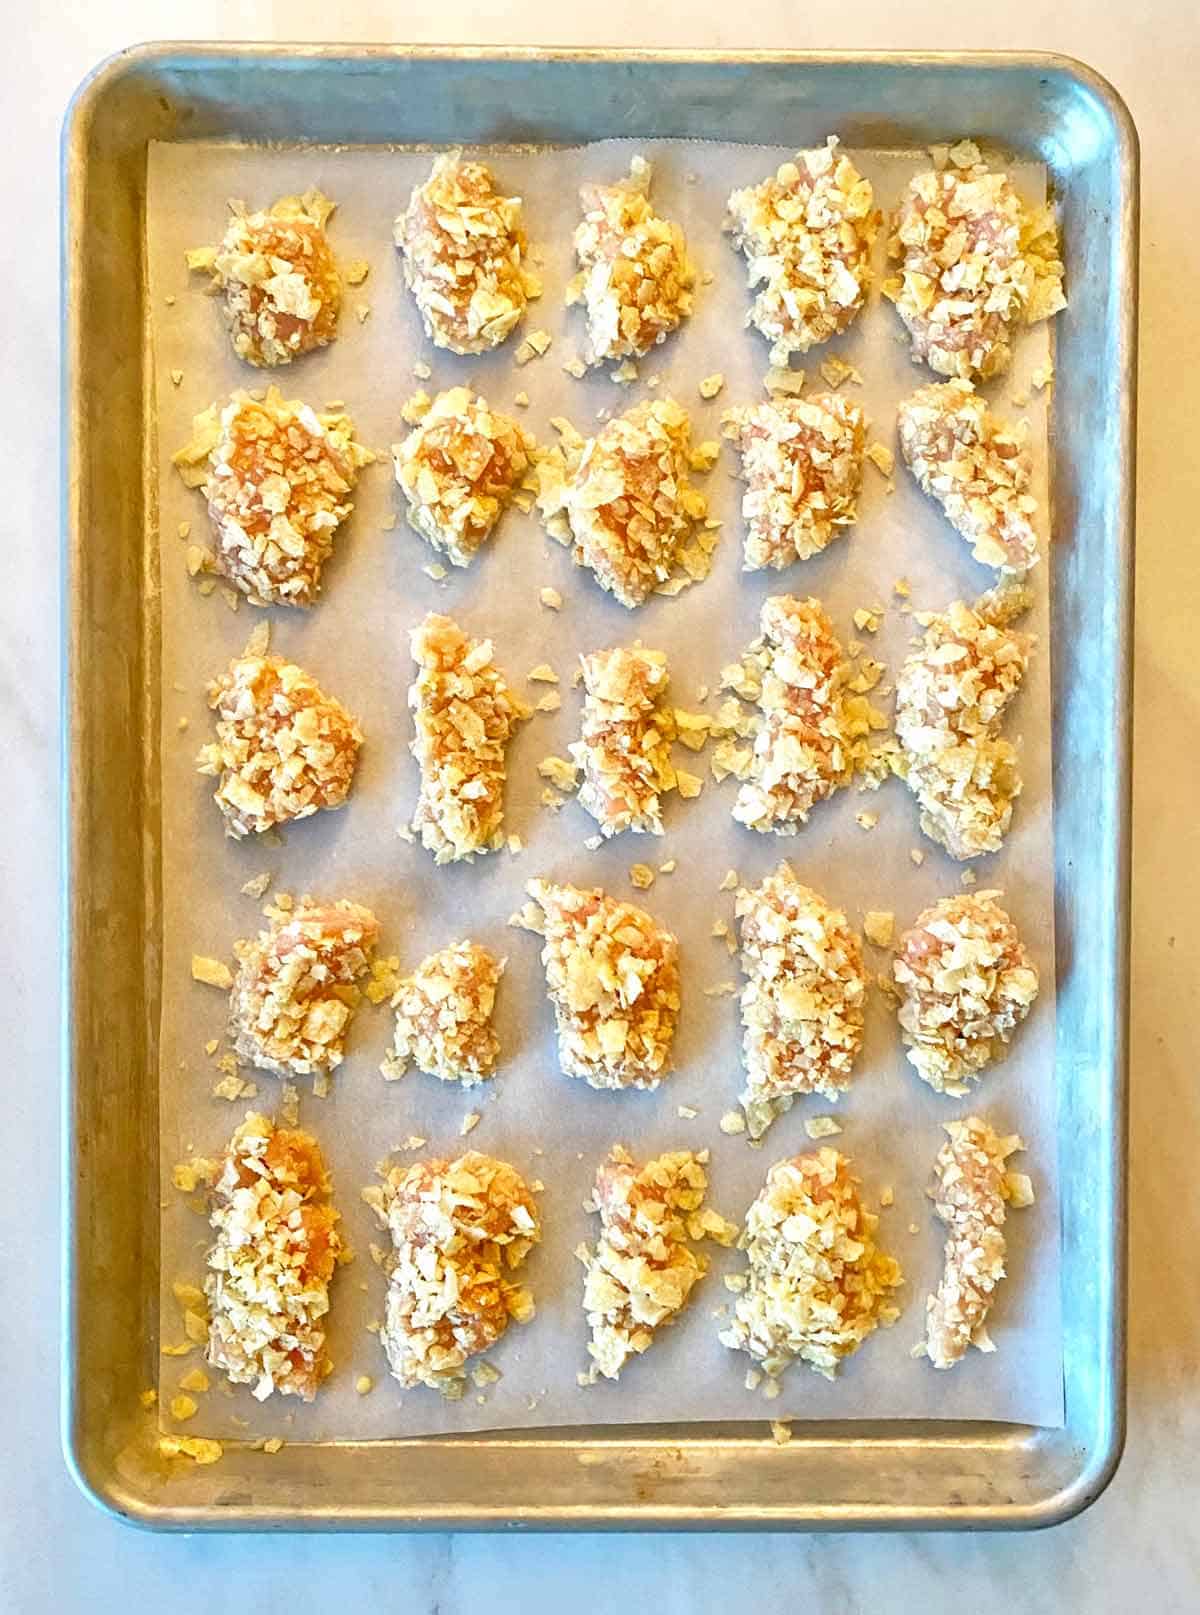 Uncooked potato chip nuggets on a baking sheet.